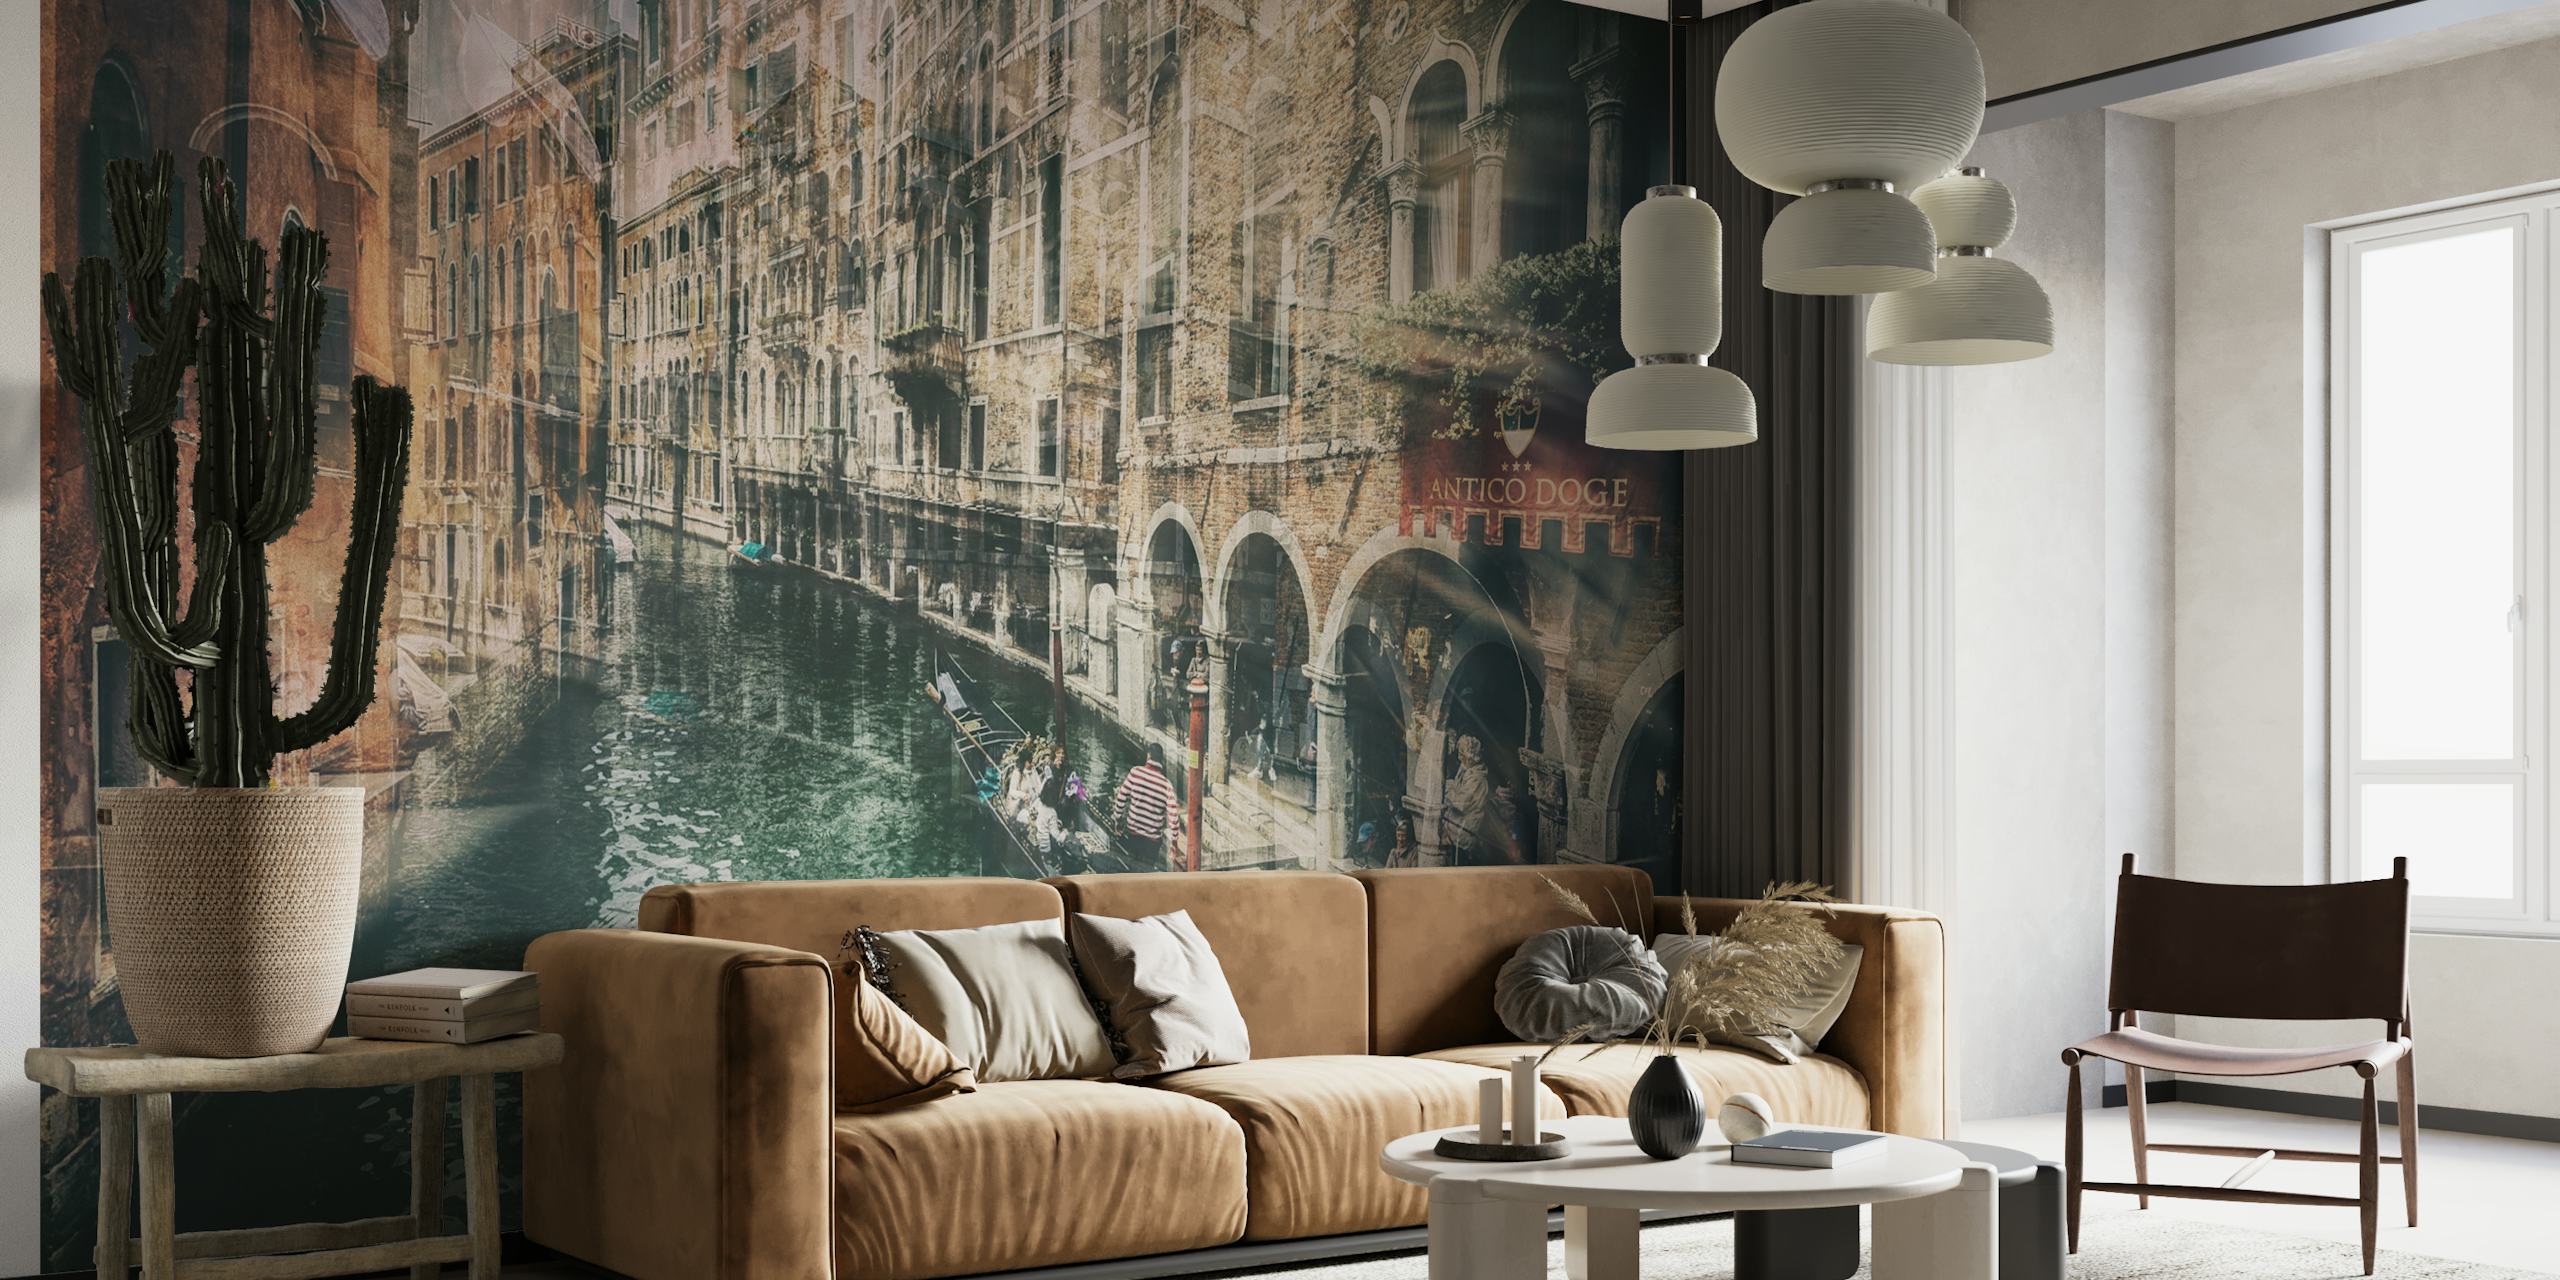 Vintage-style wall mural depicting a Venetian canal with historic architecture